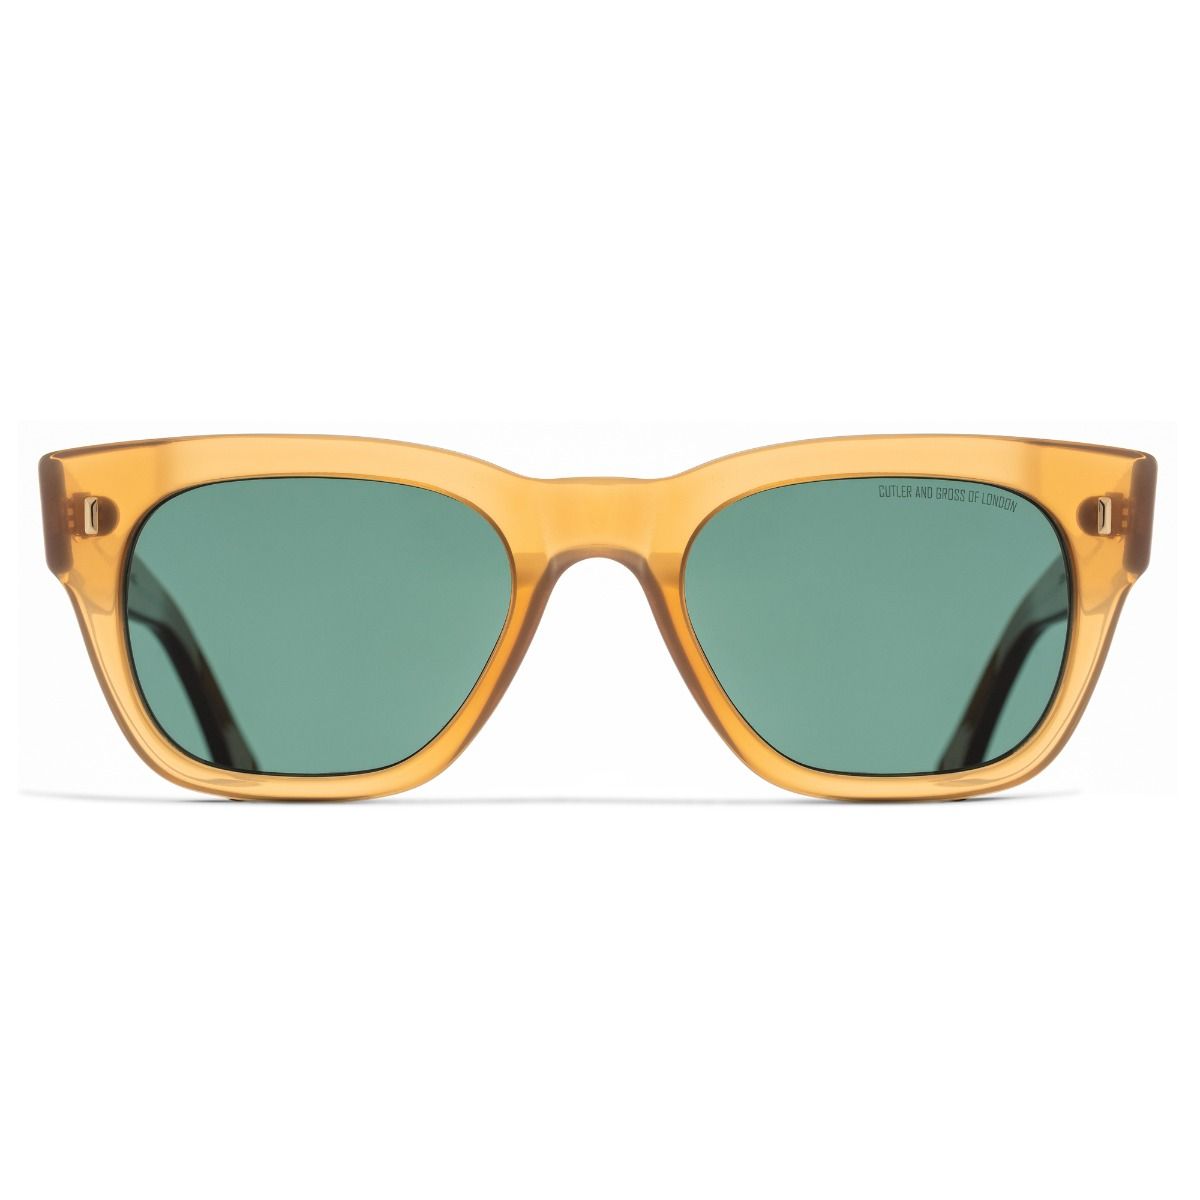 0772 V2 Square Sunglasses - Butterscotch by Cutler and Gross